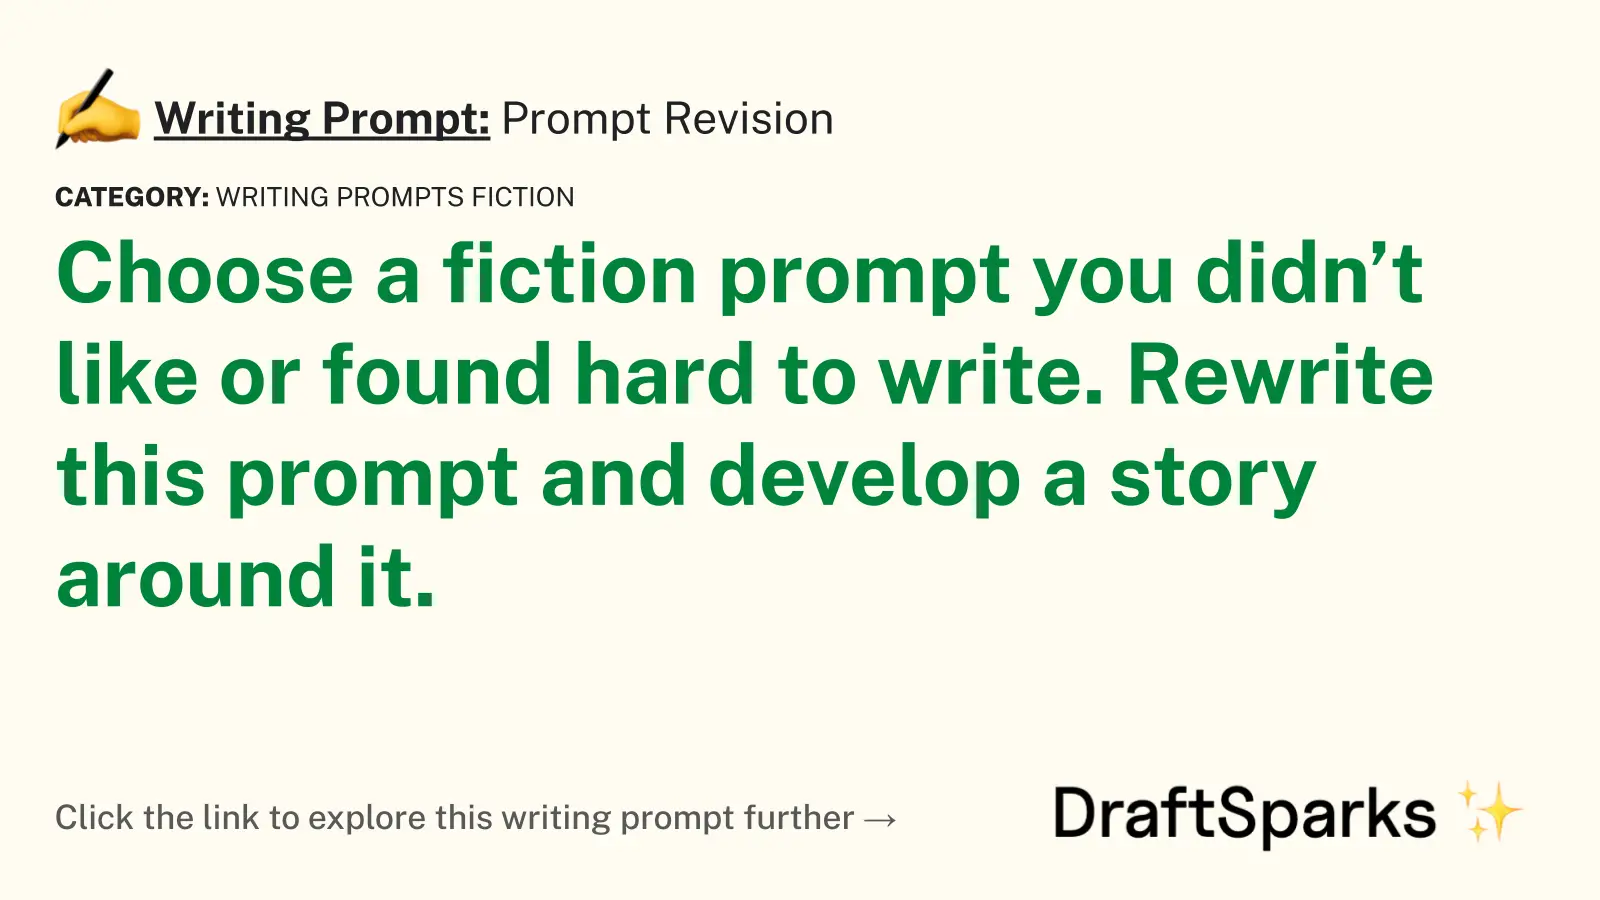 Prompt Revision